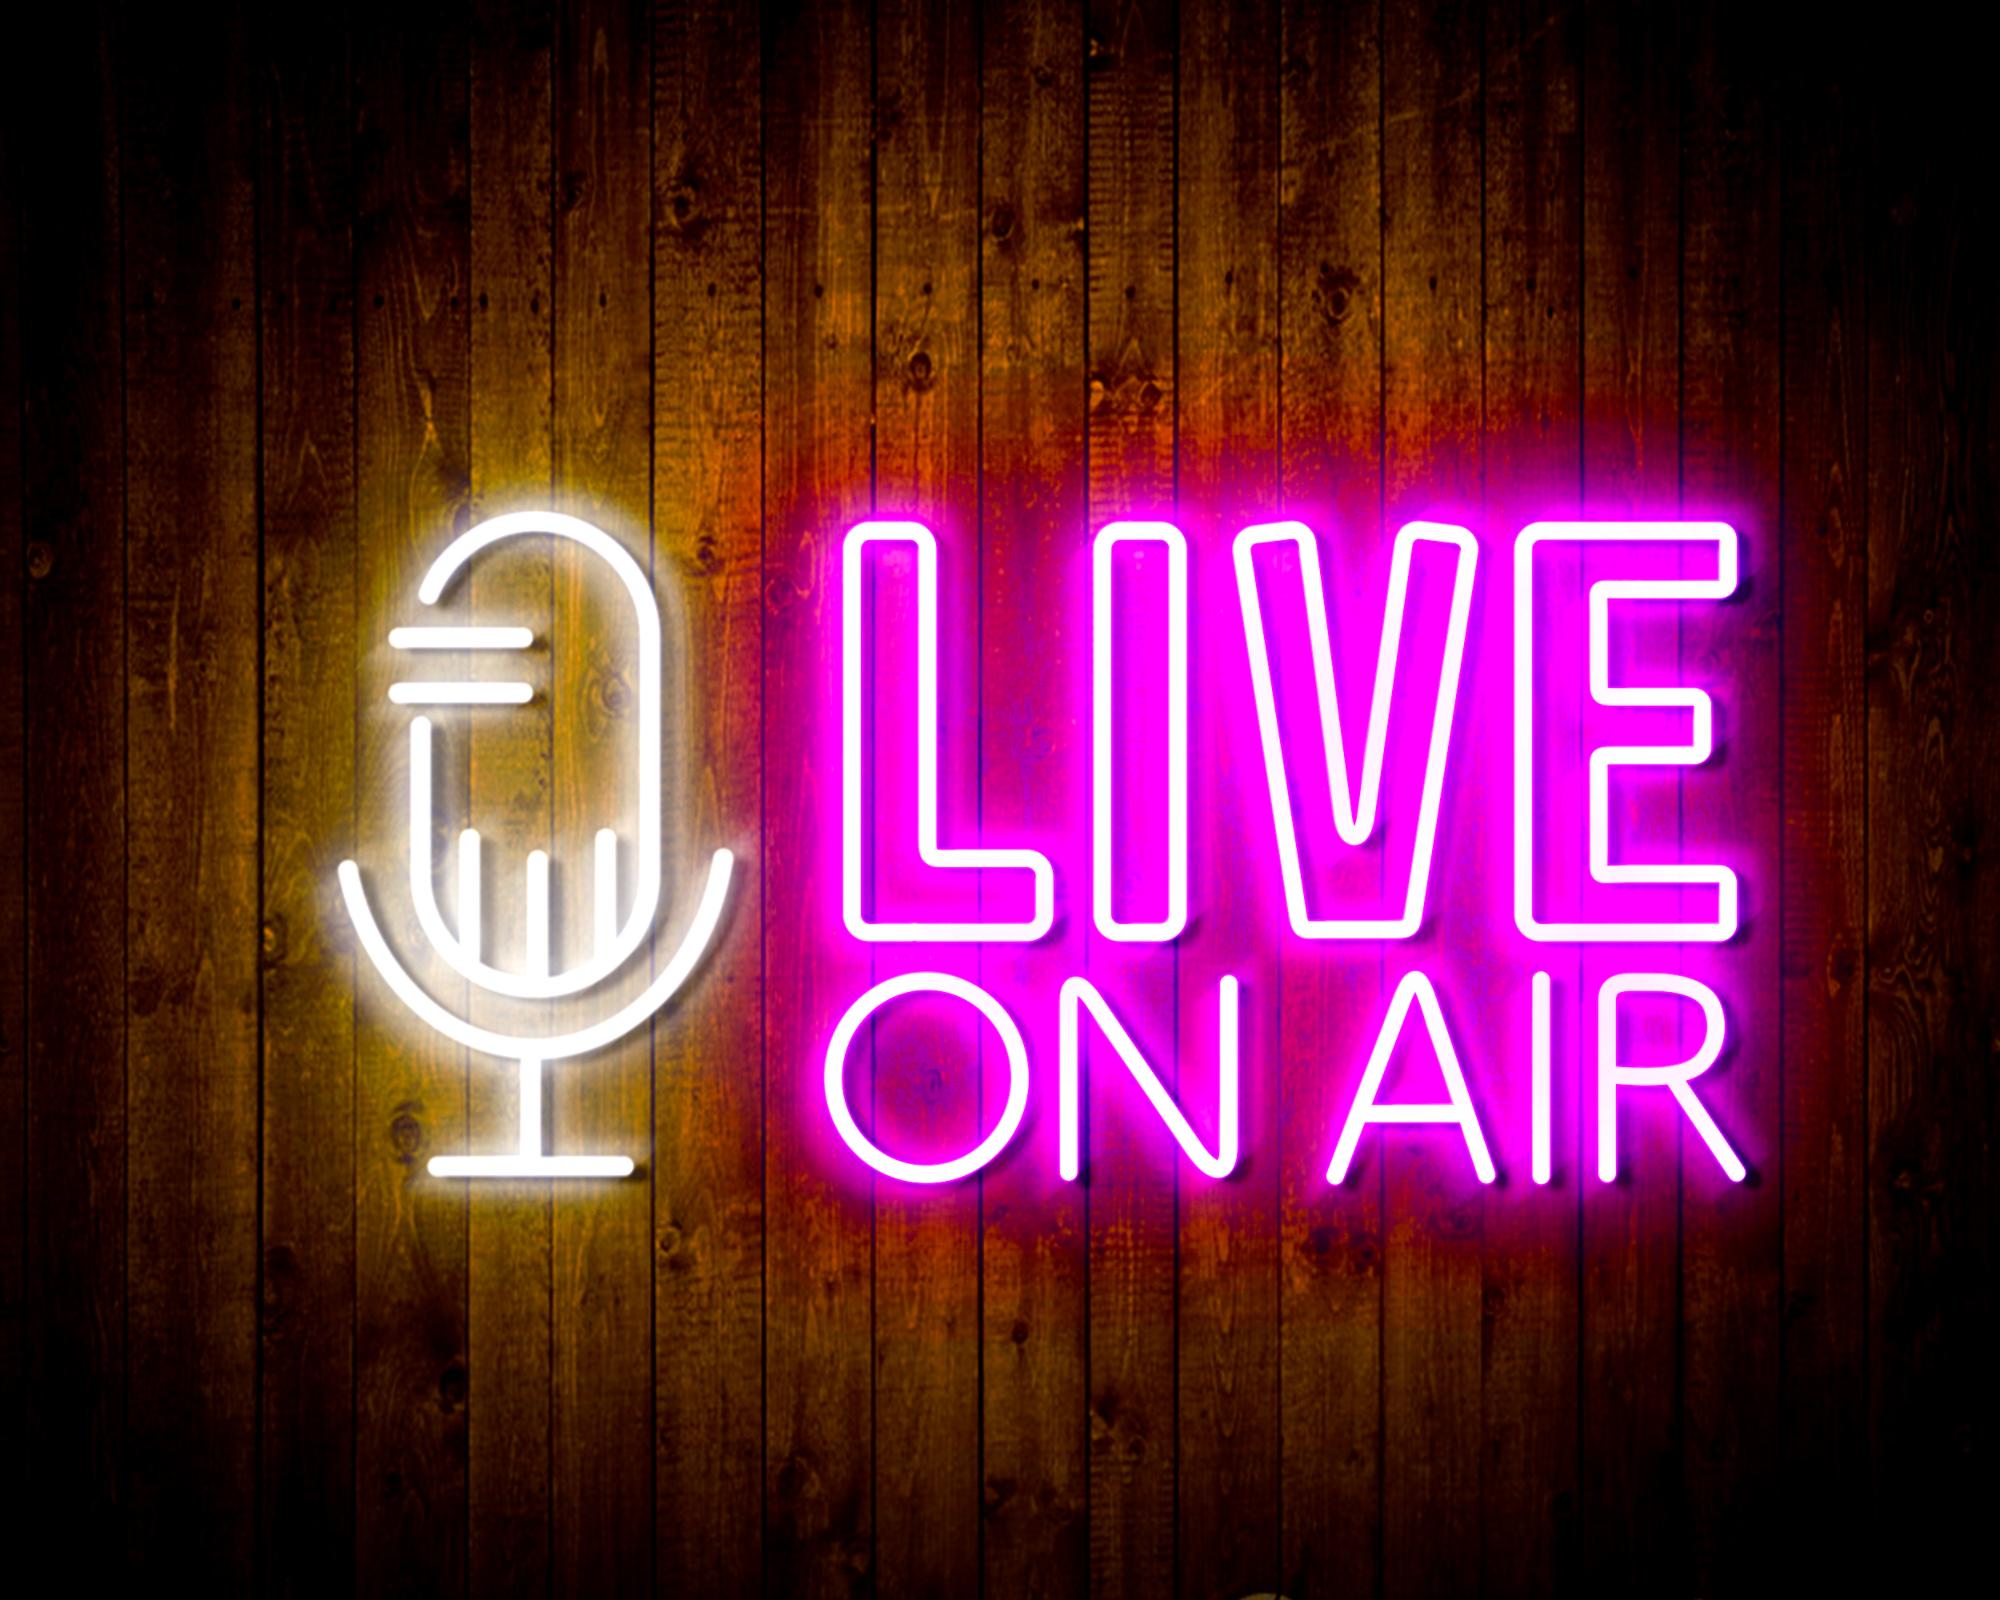 Live On Air LED Neon Sign Wall Light